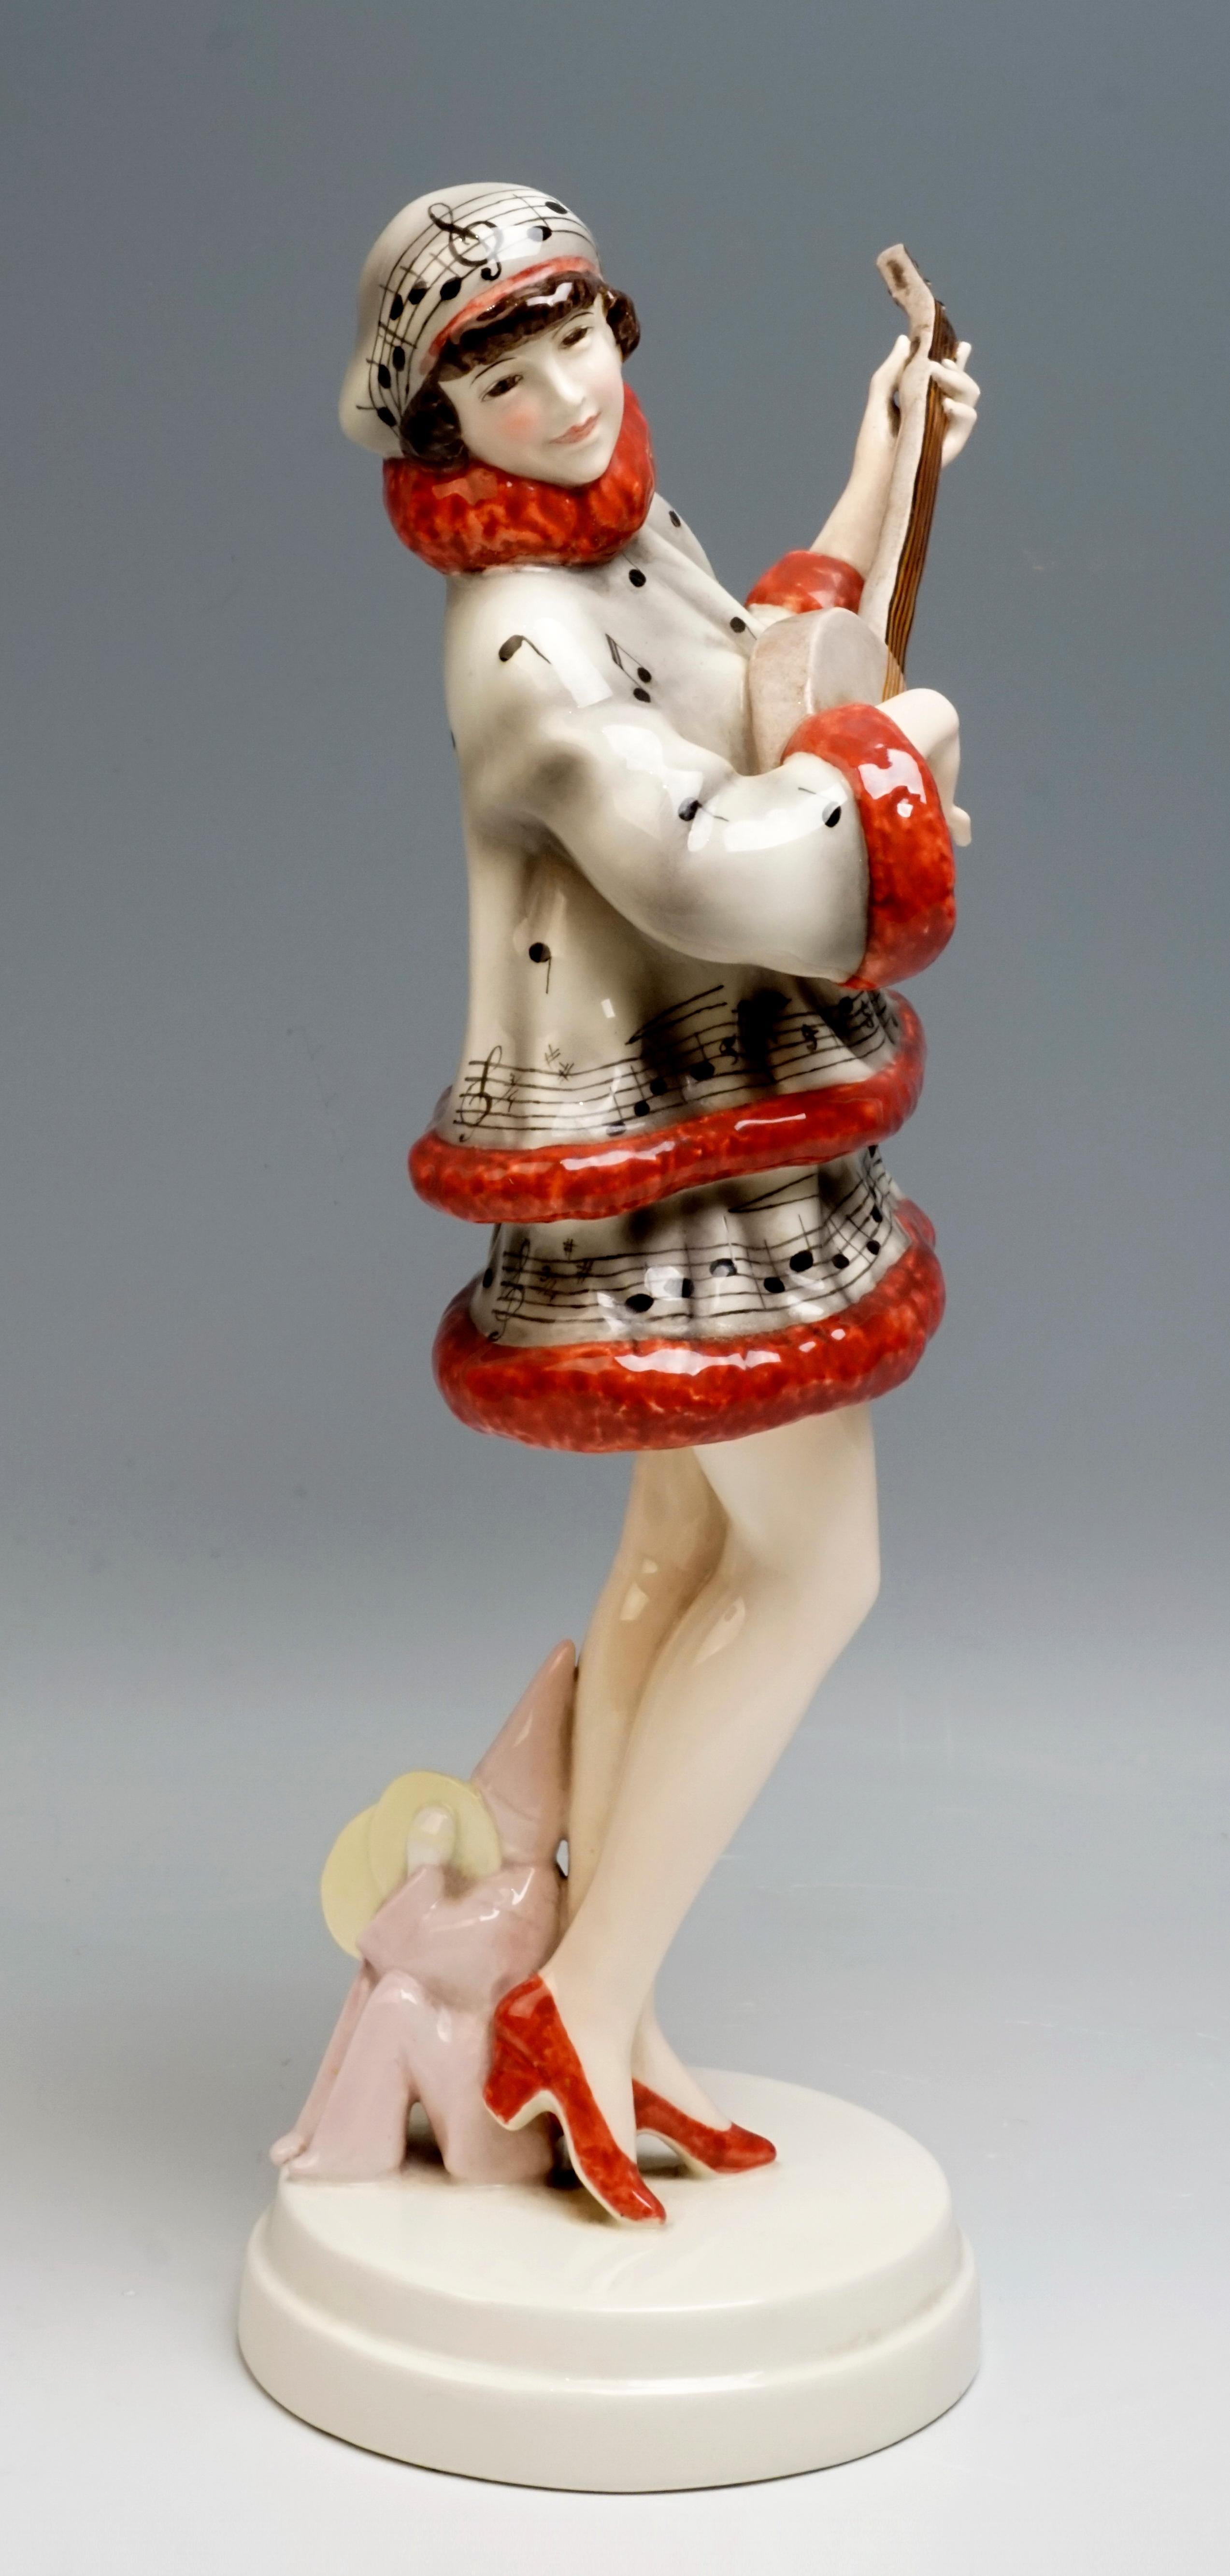 Very rare Art Déco Goldscheider ceramics figurine, circa 1930

Shown is Zerline Balten, a Viennese dancer and actress who accompanies herself on a banjo in her 'fantasy dance'. The young lady wears a winter costume, sweater and skirt in beige,